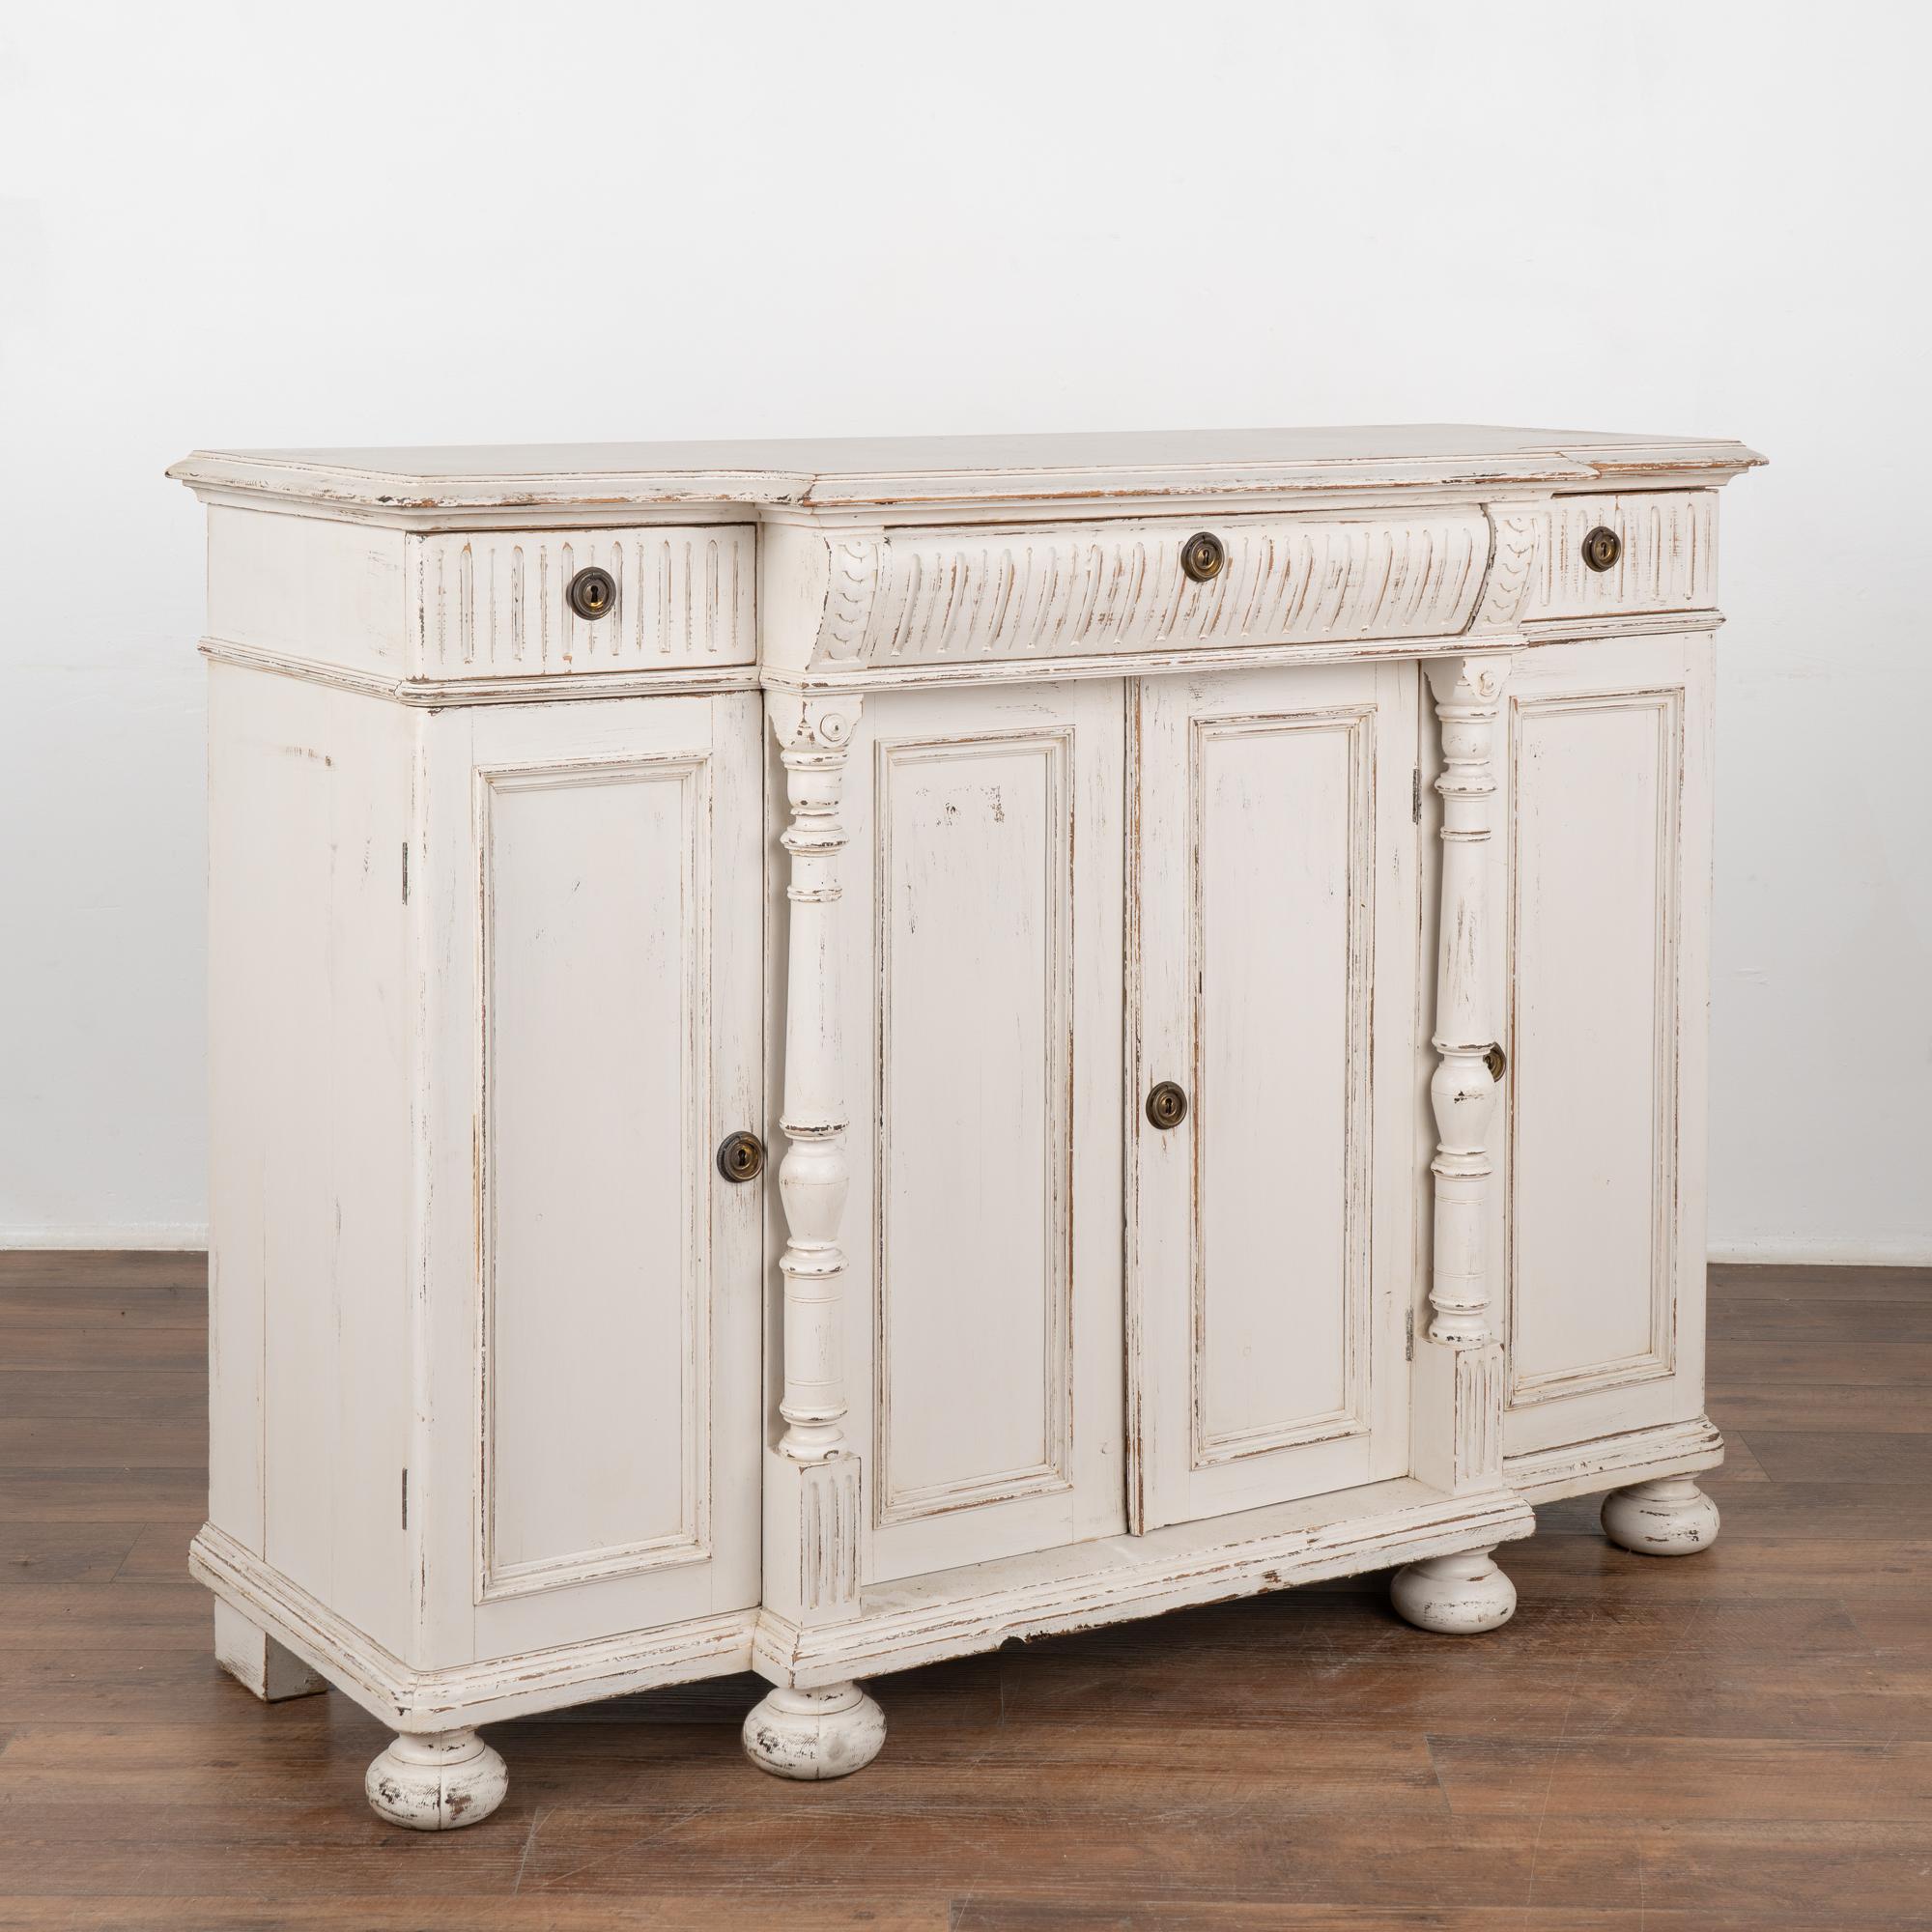 Swedish pine sideboard with turned columns, top with profiled edge, fluted carving along drawers all resting on large bun feet.
Newer, professionally applied white painted finish slightly distressed to fit the age and grace of this lovely